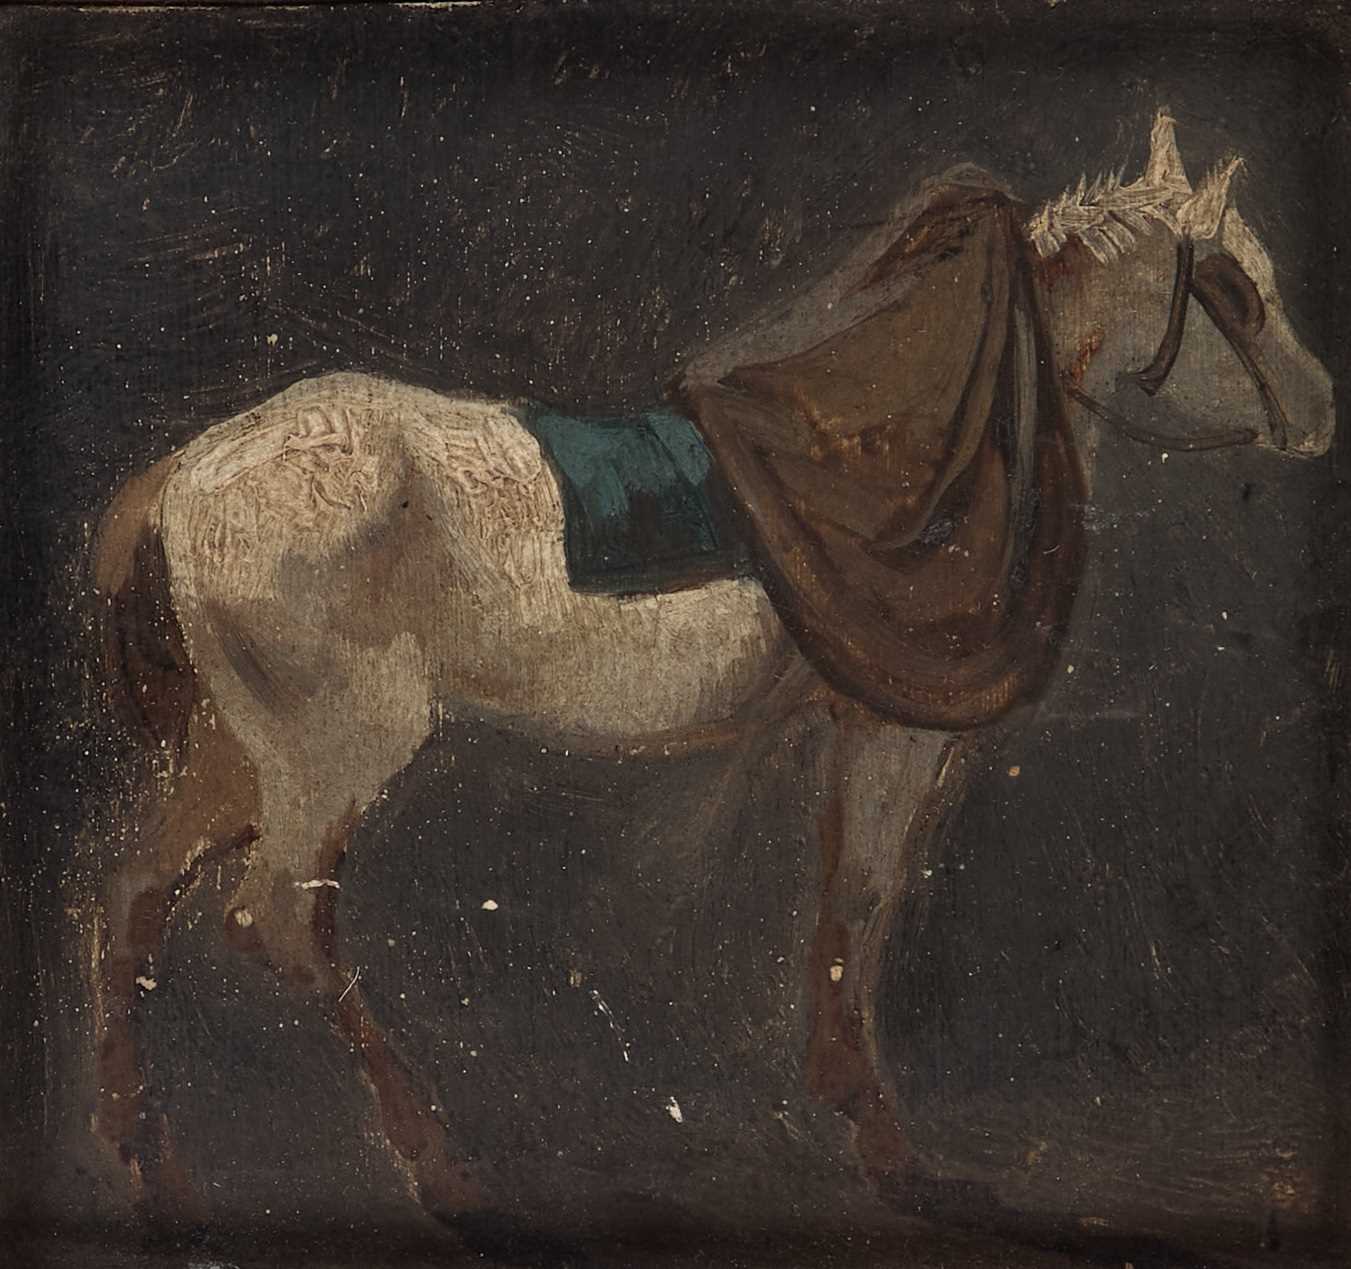 ATTRIBUTED TO RICHARD PARKES BONINGTON (1802-1828) OIL SKETCH OF A HORSE - Image 2 of 7